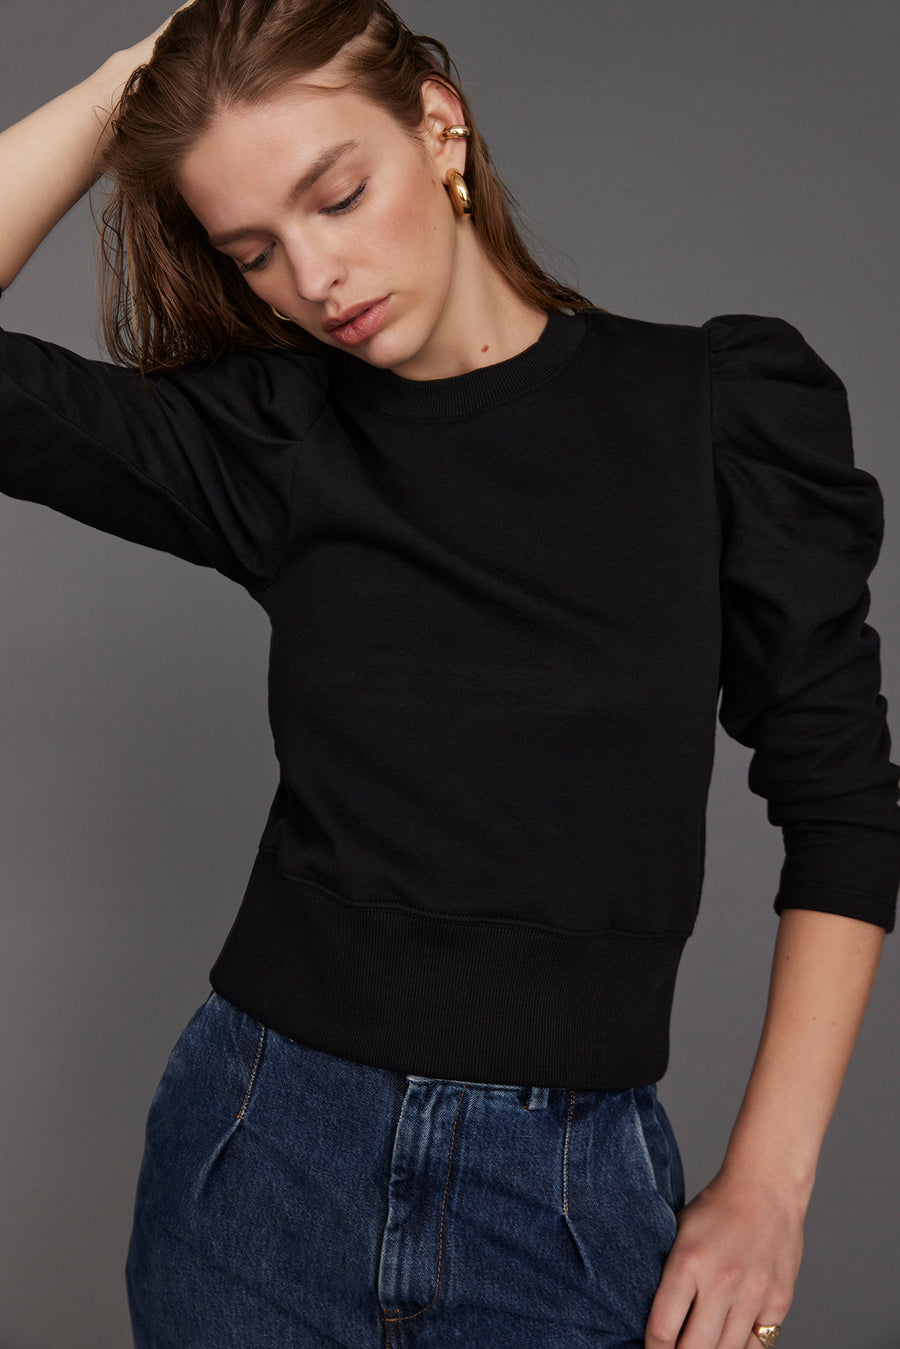 The Just Enough Puff Sweatshirt in Black